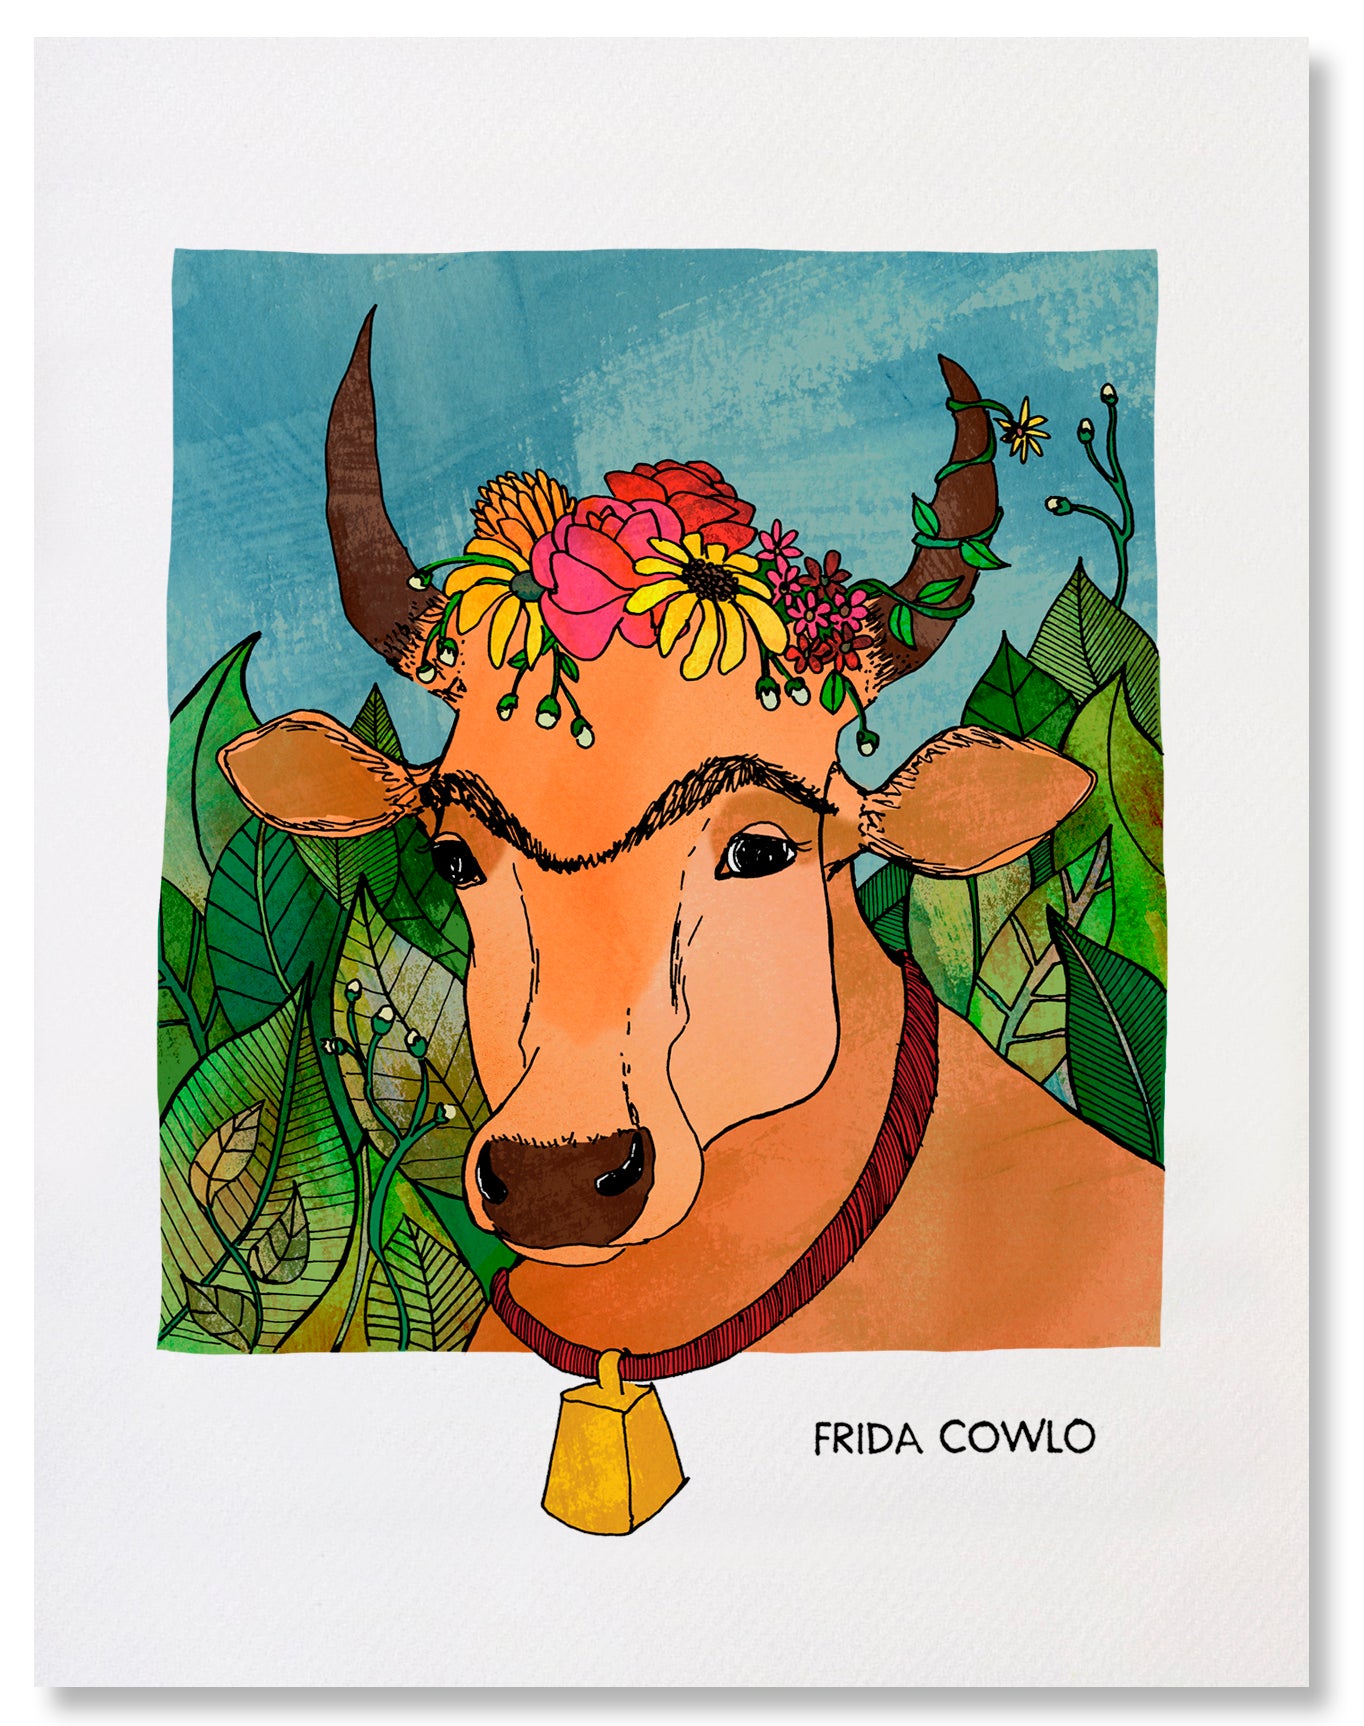 The Frida Cowlo fine art print depicts a portrait of Frida Kahlo as a tan cow with a unibrow and flowers along the top of her head between her horns. A vine with a flower twirls its way up the right-side horn. The cow is also wearing a cow bell that hangs on a red collar. The cow is in front of a wall of lush, green foliage and blue sky. The artwork is printed on a lightly textured, 100% cotton rag paper, which feels like smooth watercolor paper.